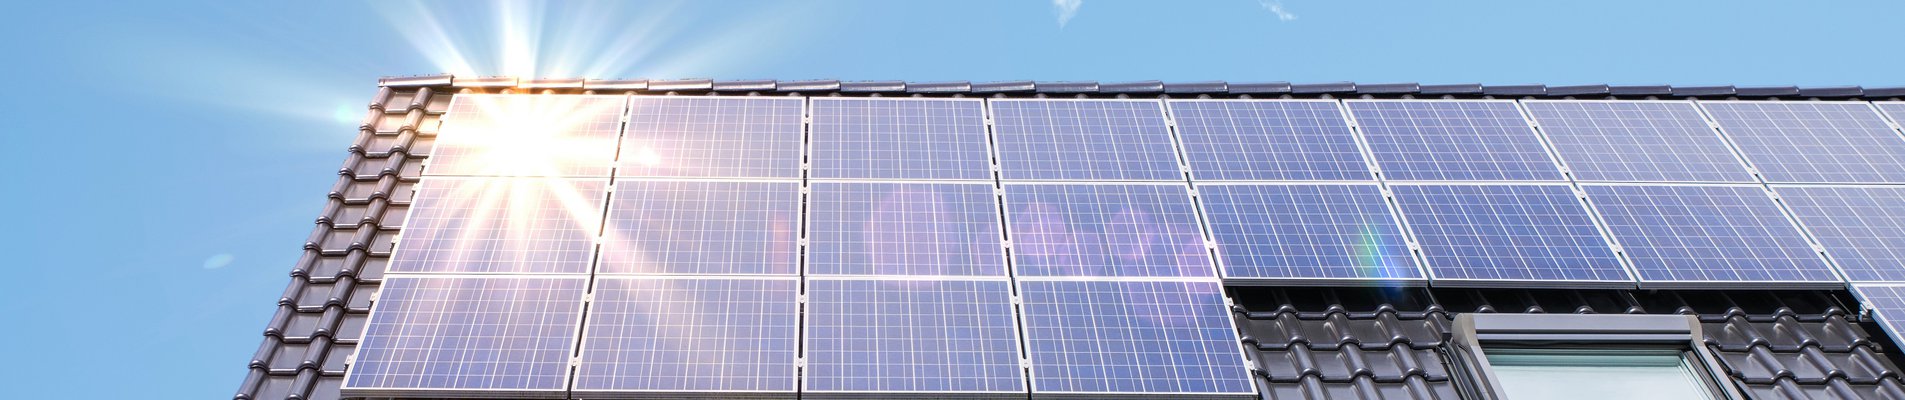 Photovoltaic panels on the roof